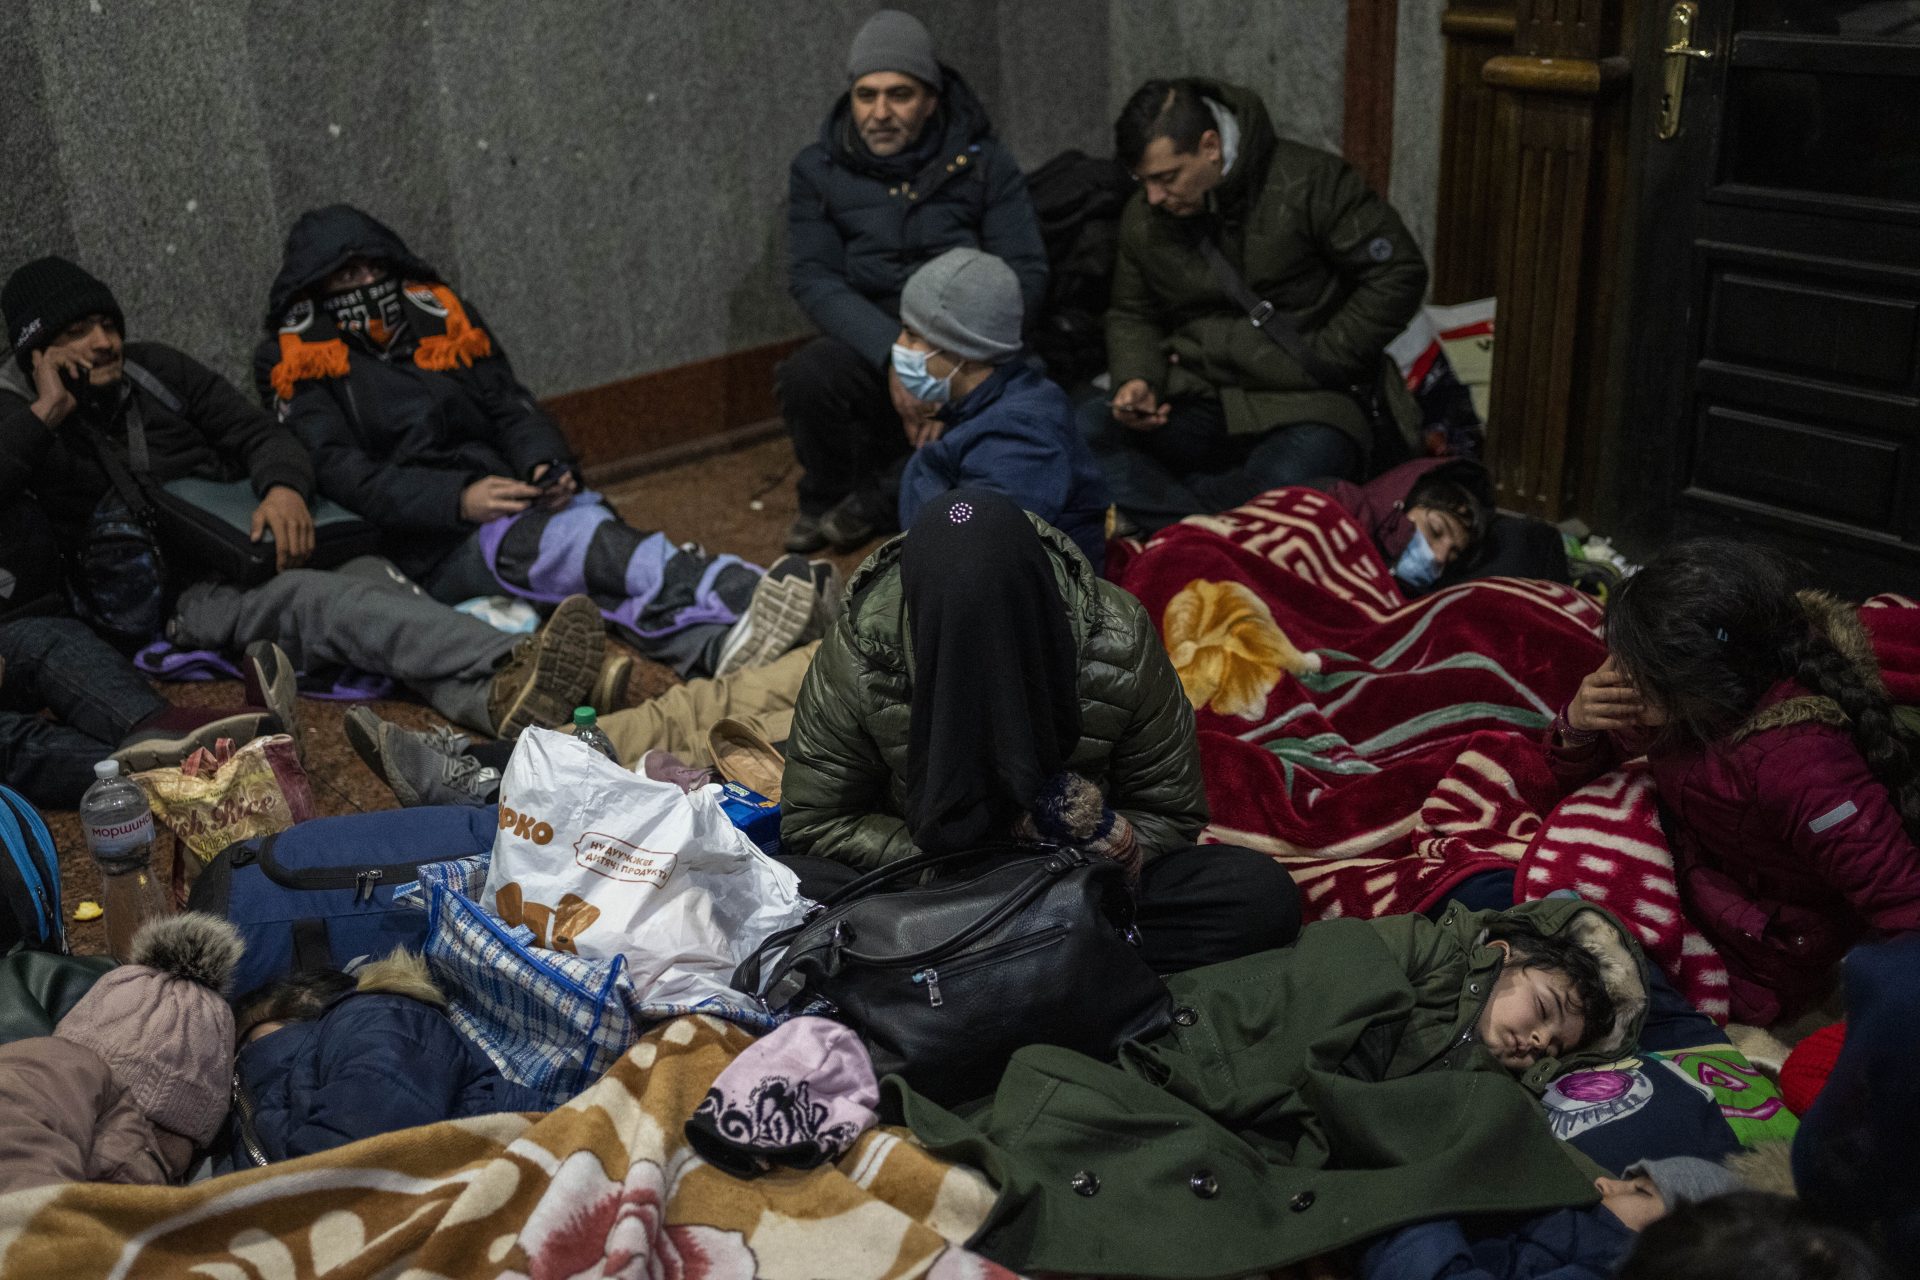 Afghans trying to flee Ukraine sleep inside Lviv railway station, Monday, Feb. 28, 2022, in Lviv, west Ukraine. Russia's military assault on Ukraine has entered its fifth day, forcing hundreds of thousands of Ukrainians and foreign residents to escape from war and seek refuge in neighboring countries.